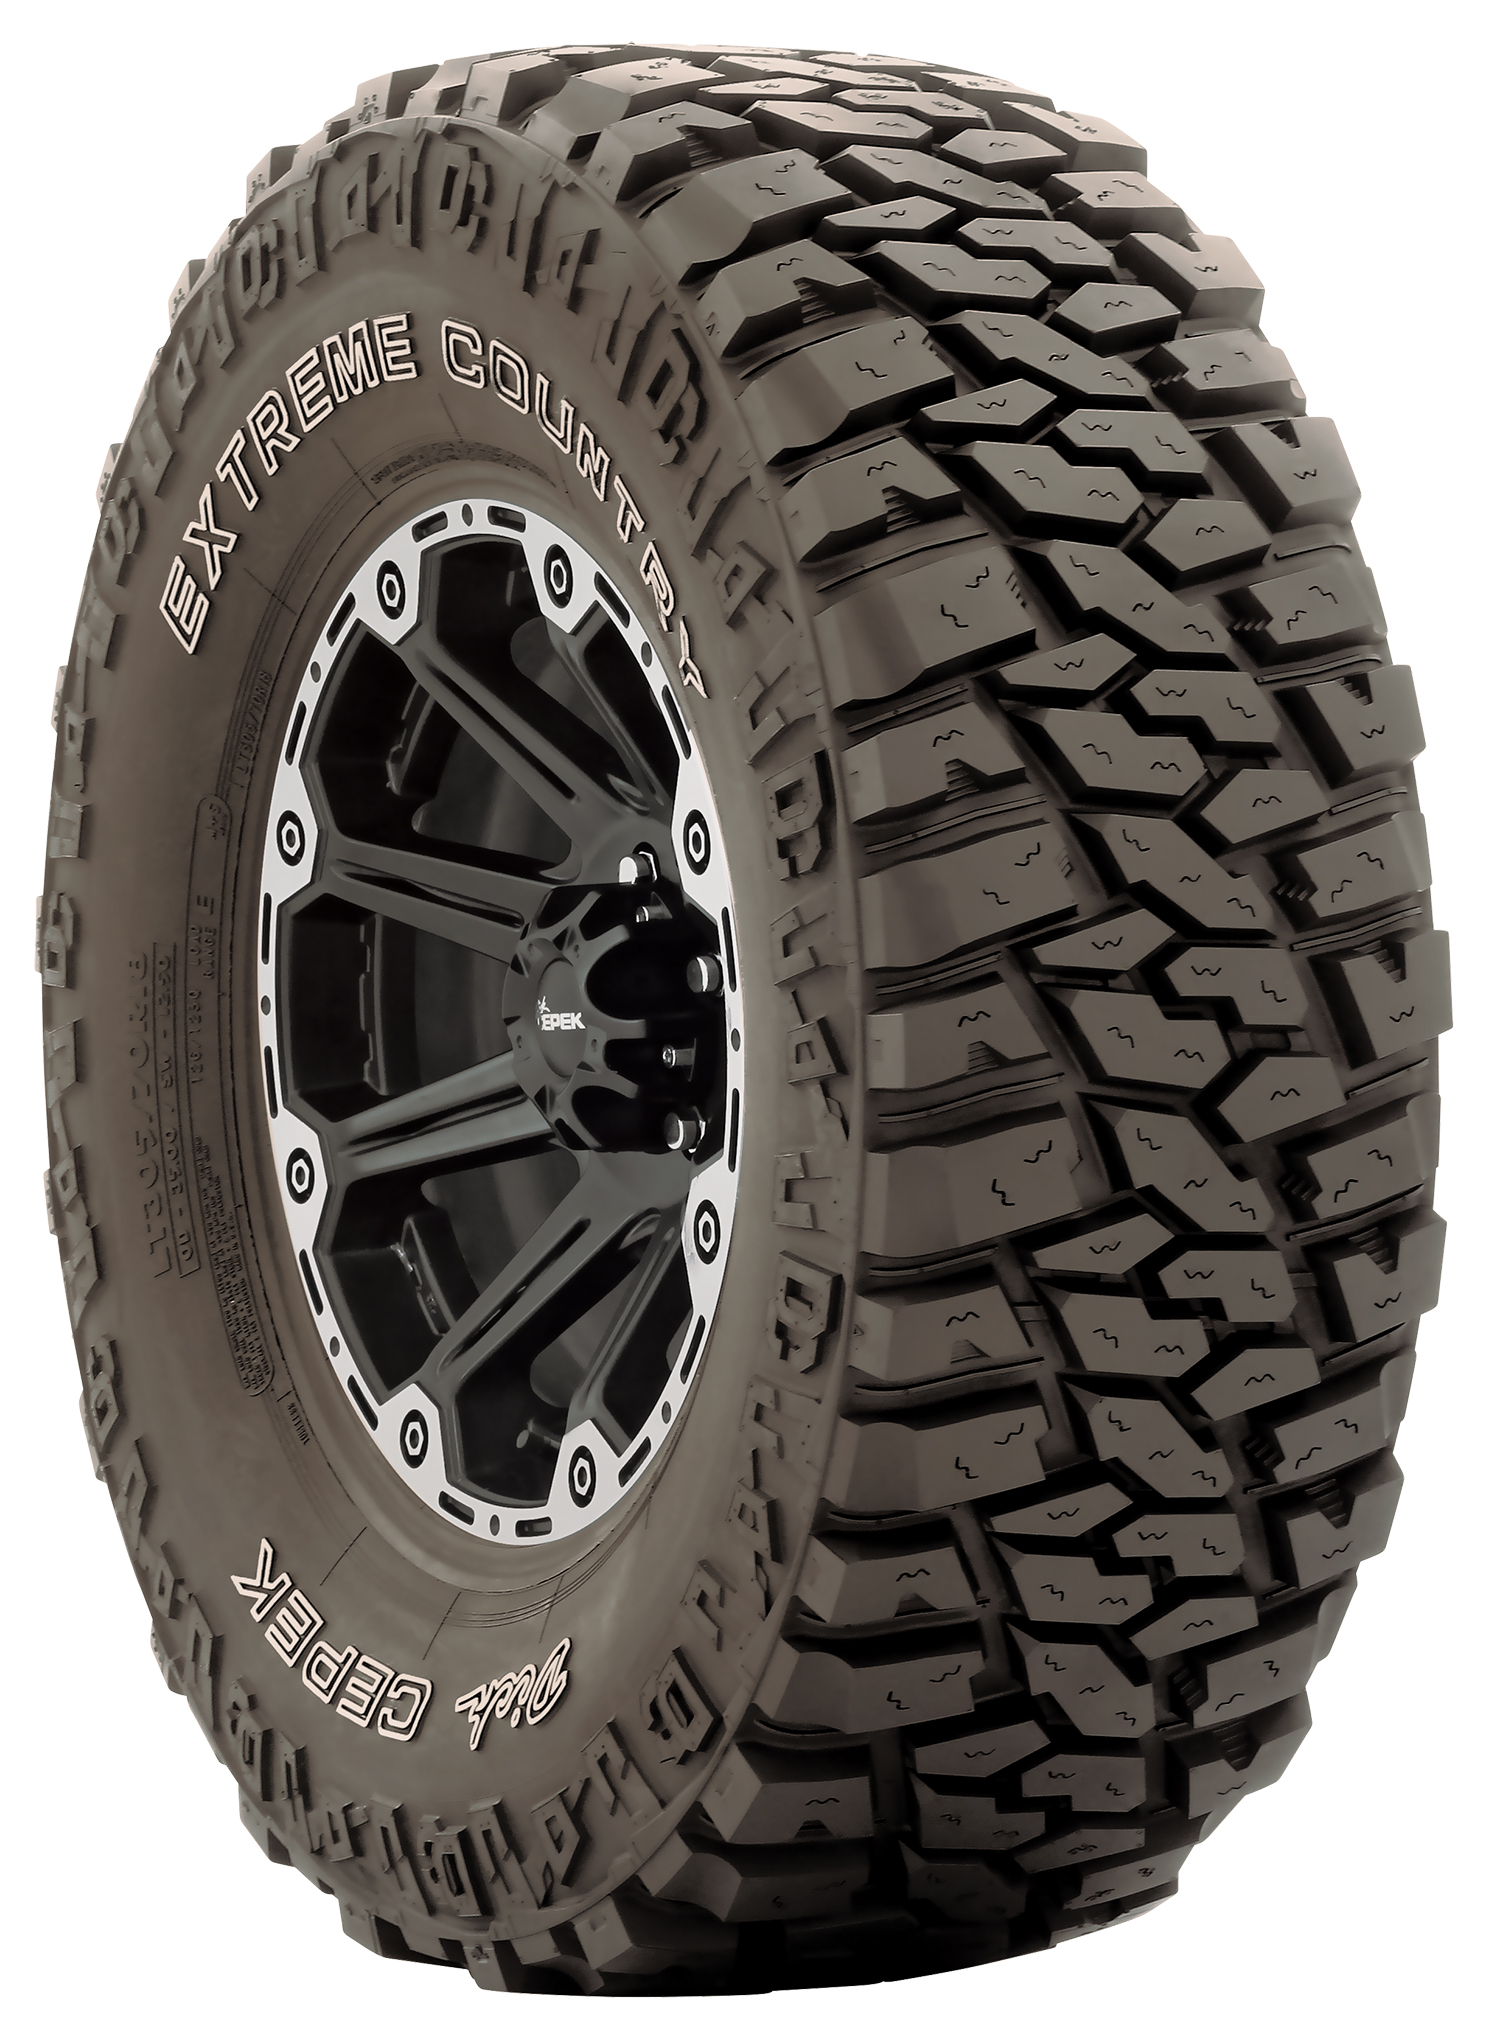 Dick Cepek Extreme Country All-Terrain Radial Tire - LT305/55R20 121Q